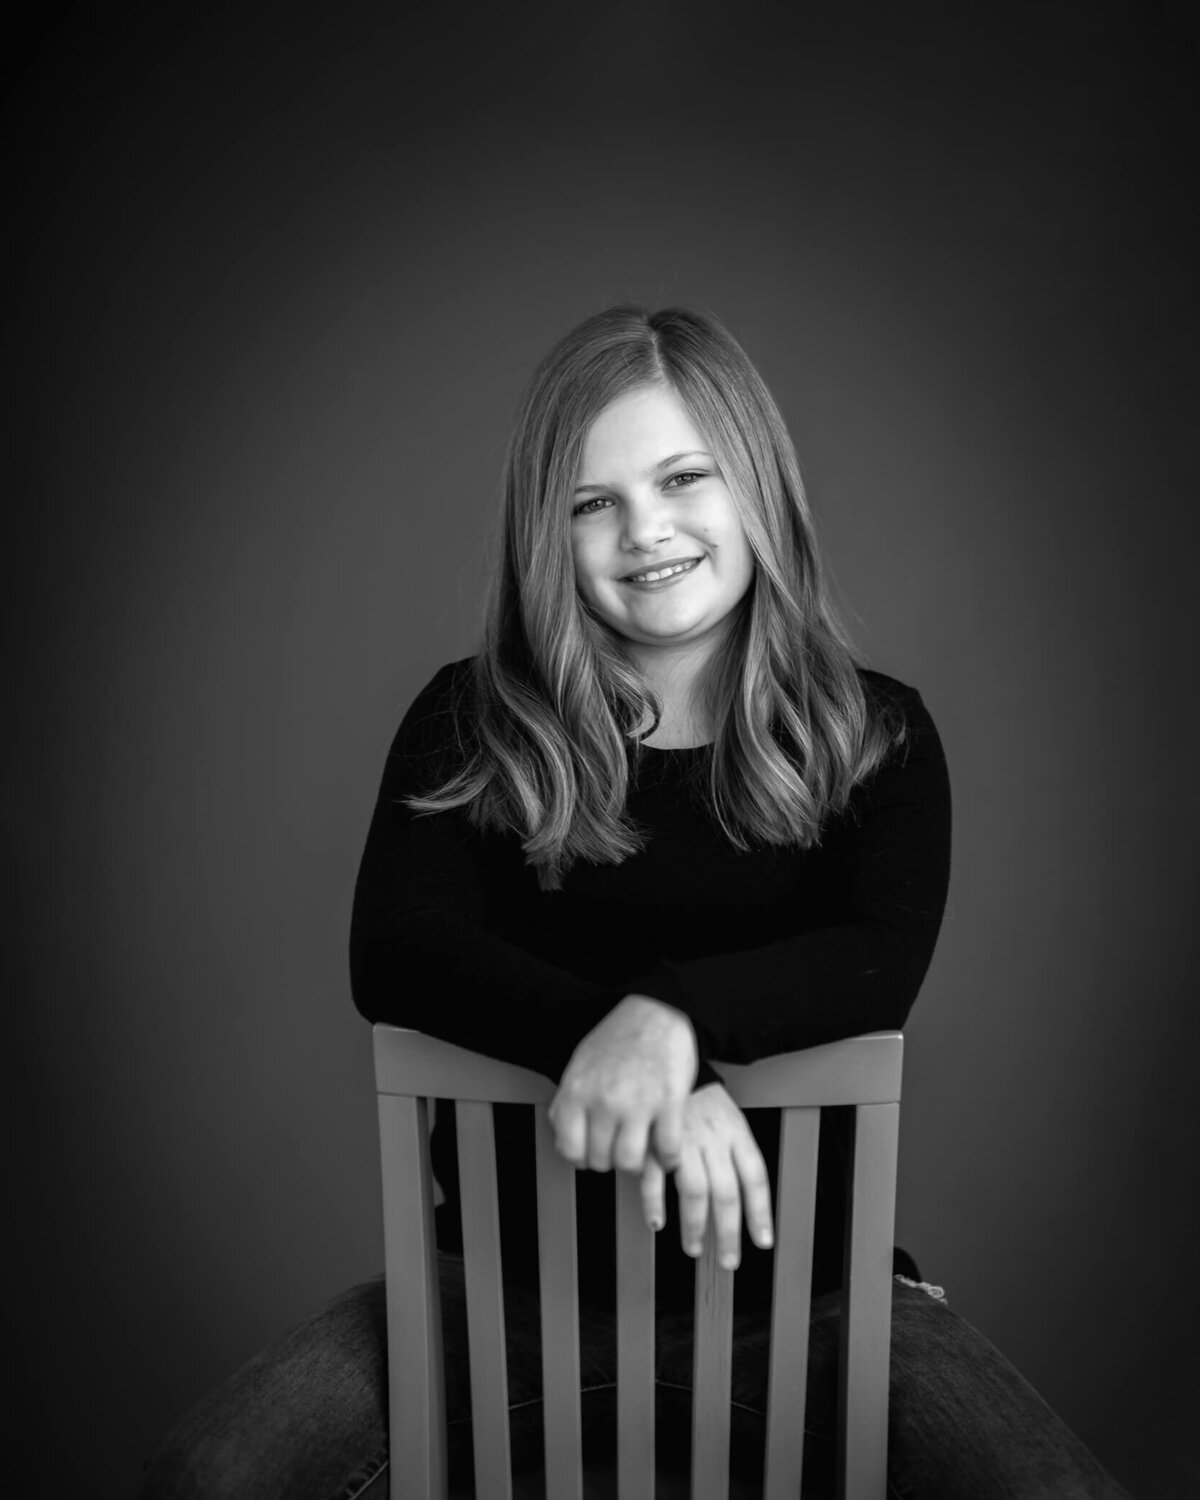 10 the birthday studio portrait of a girl in black and white with a dark background sitting backwards on a chair